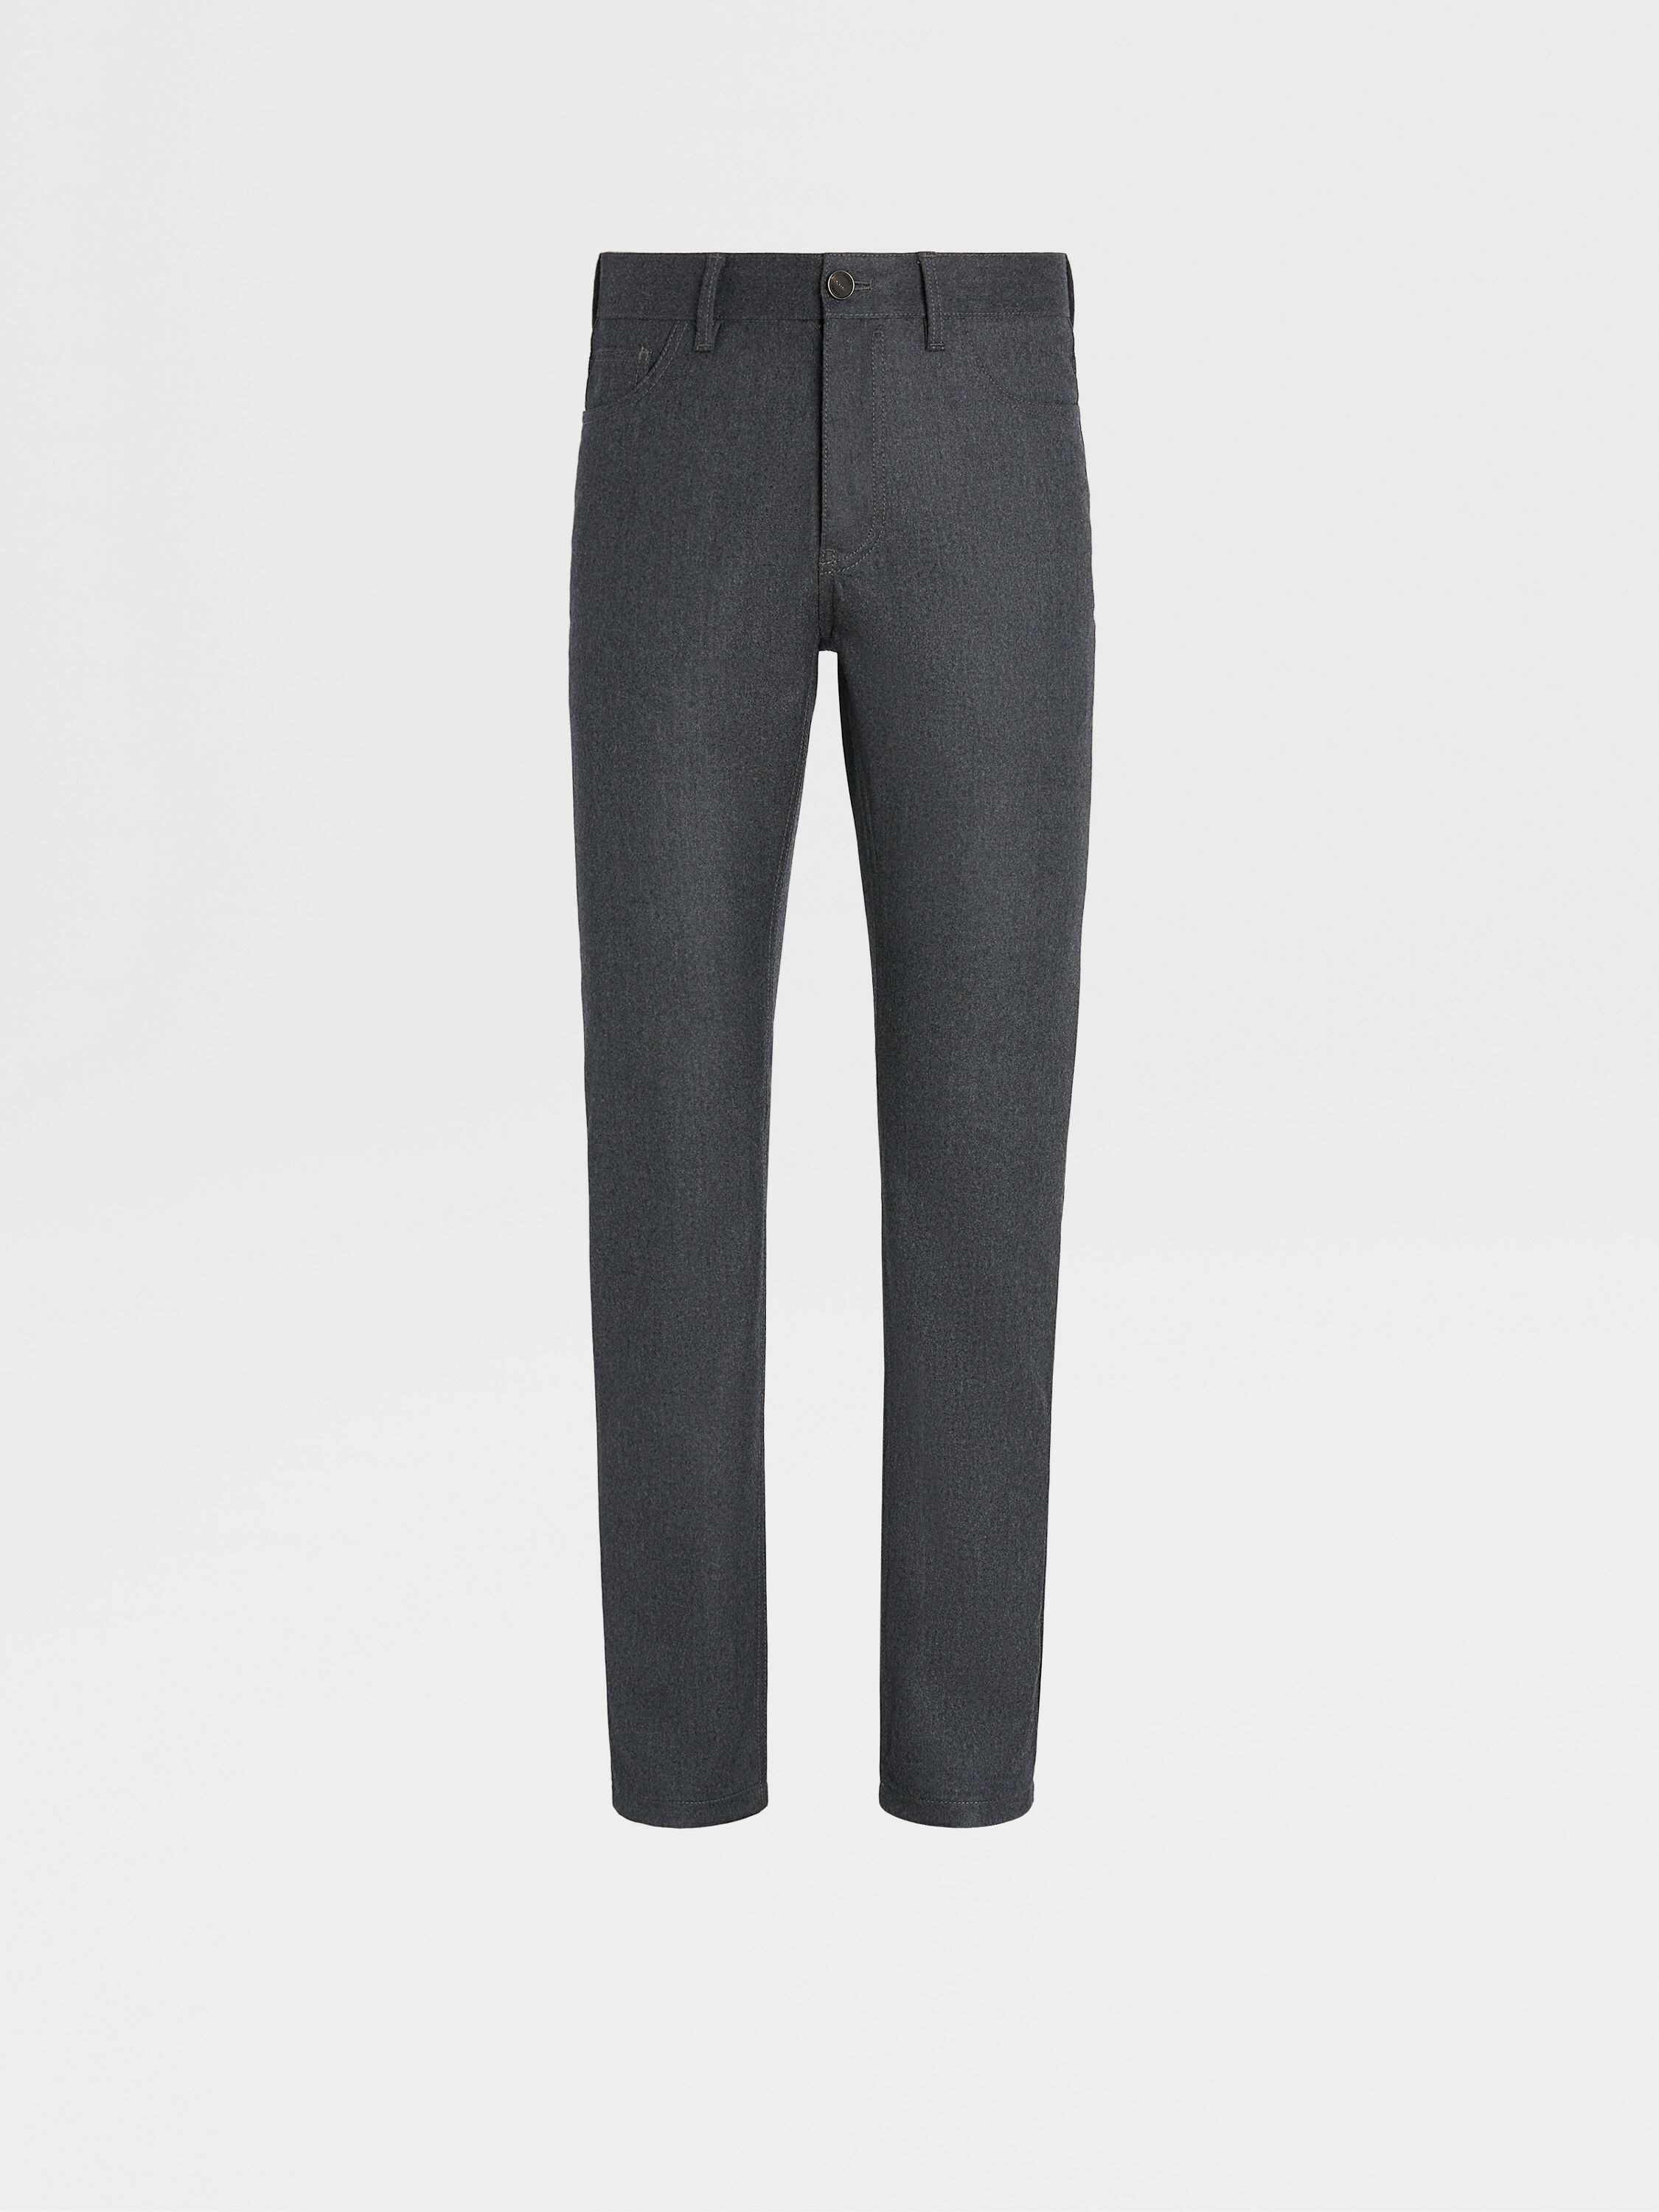 Dark Grey Wool and Cashmere Roccia Pants